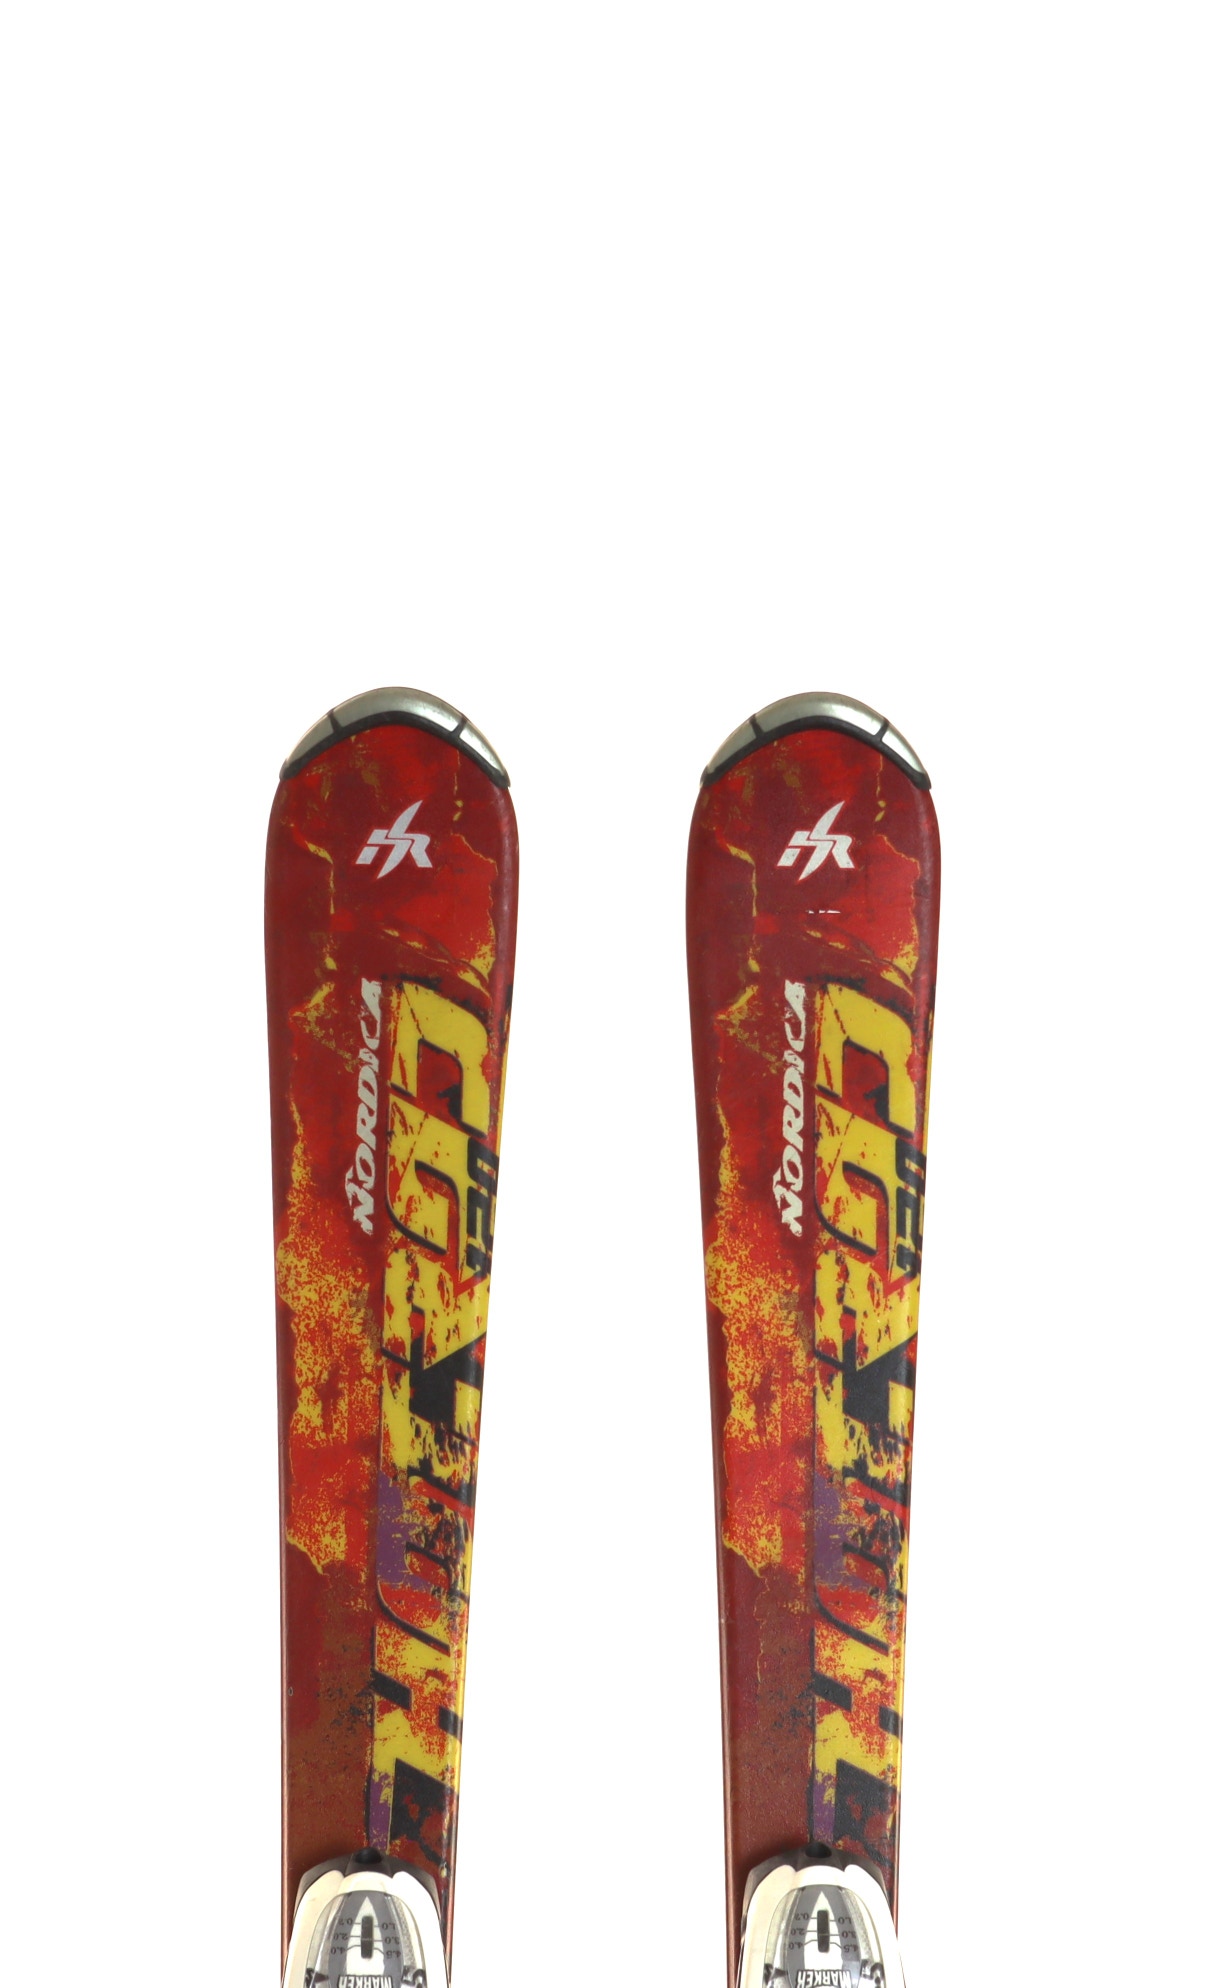 Used 2012 Nordica Hotrod Ski with Marker 4.5 Bindings Size 120 (Option 240099)